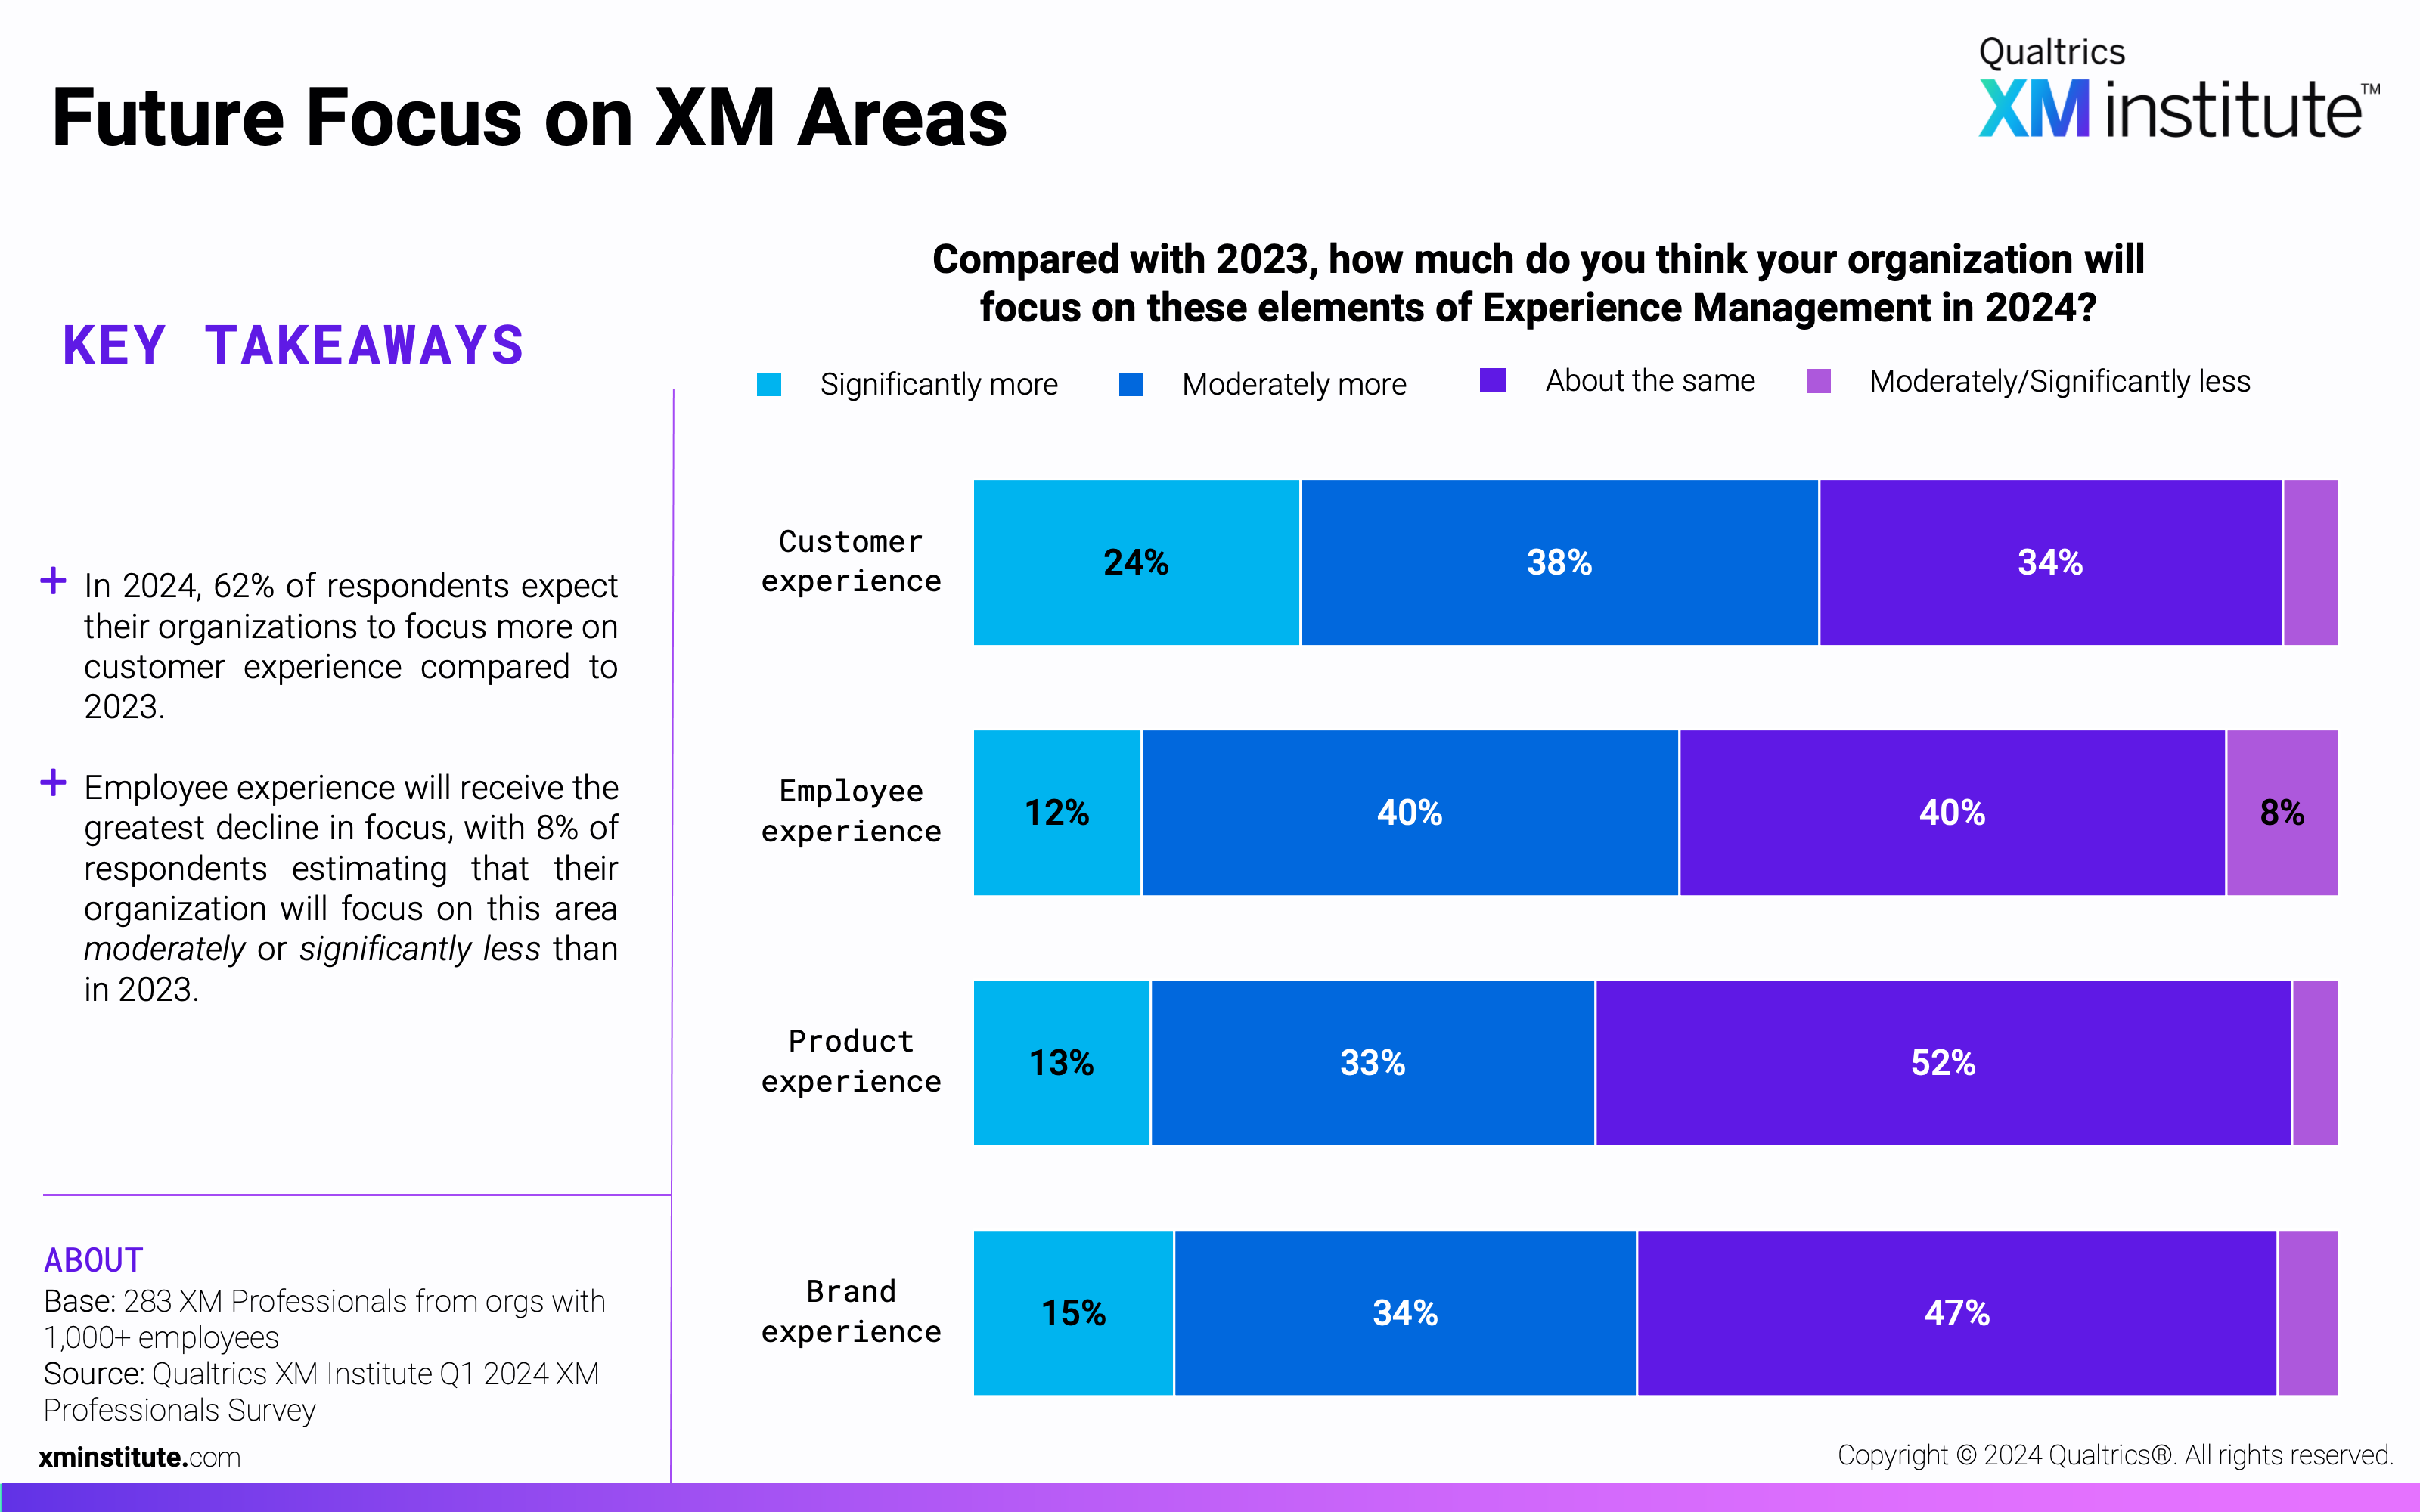 This chart shows how much more or less respondents expect their organization to focus on CX, EX, PX, and BX in 2024 compared to 2023.